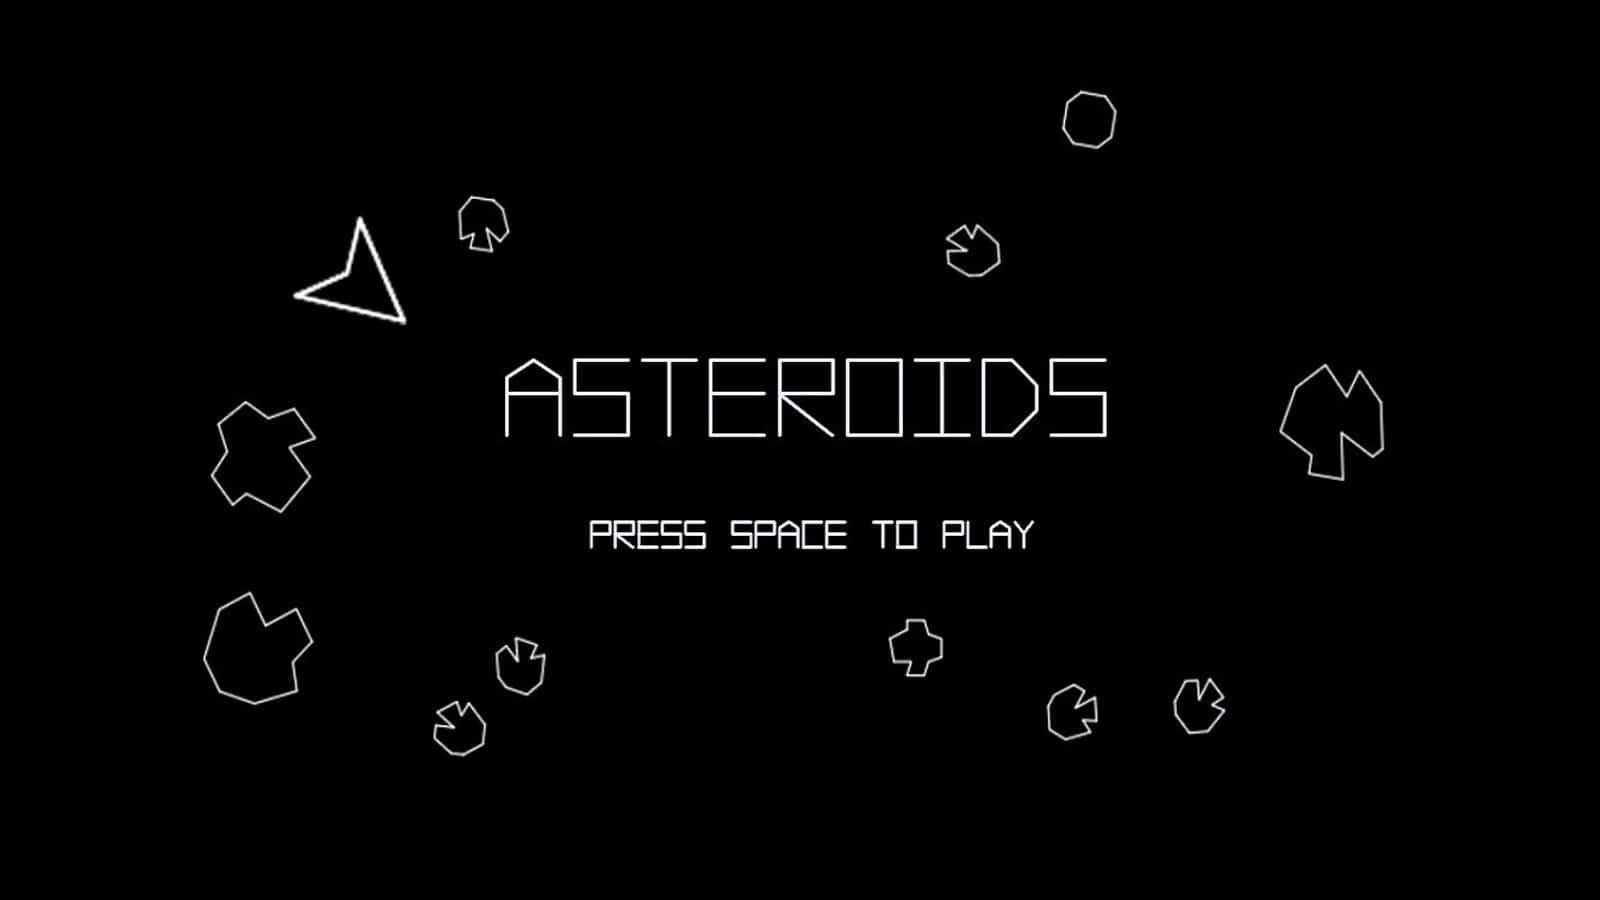 Unveiling the Cosmic Odyssey: Asteroids (1979) – A Retro Gaming Classic